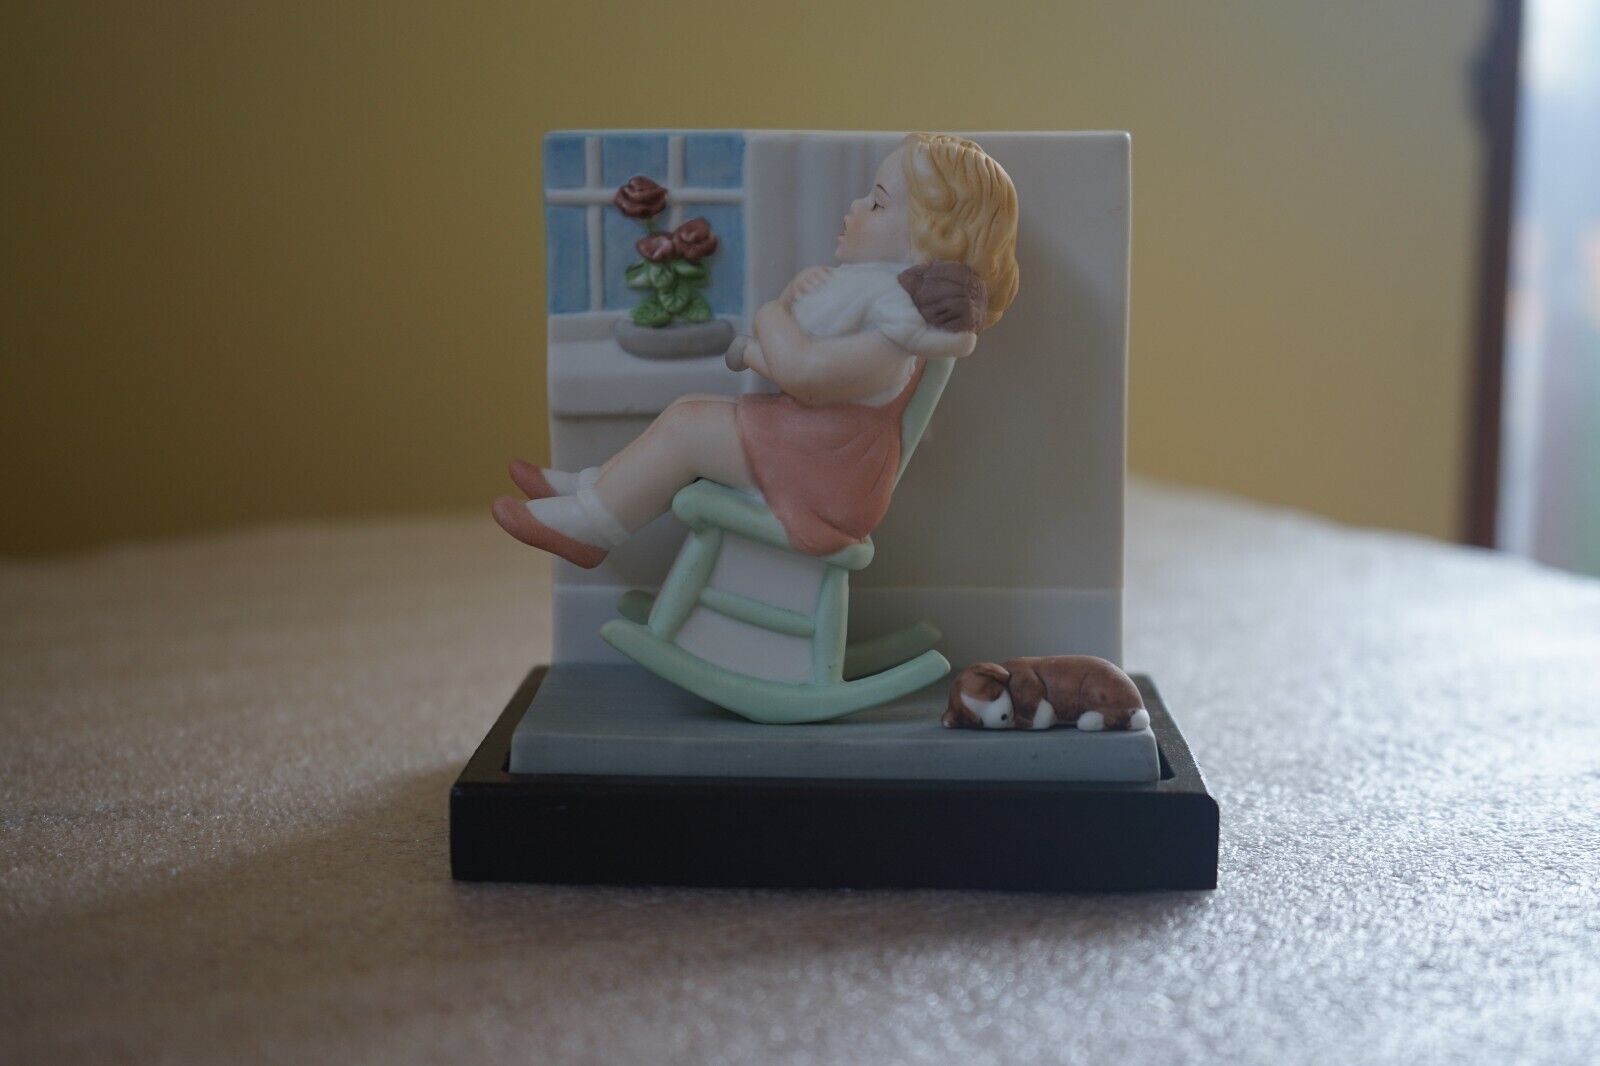 1985 Heirloom Tradition Bessie Pease Gutmann Lullaby Limited Edition 1524/10,000